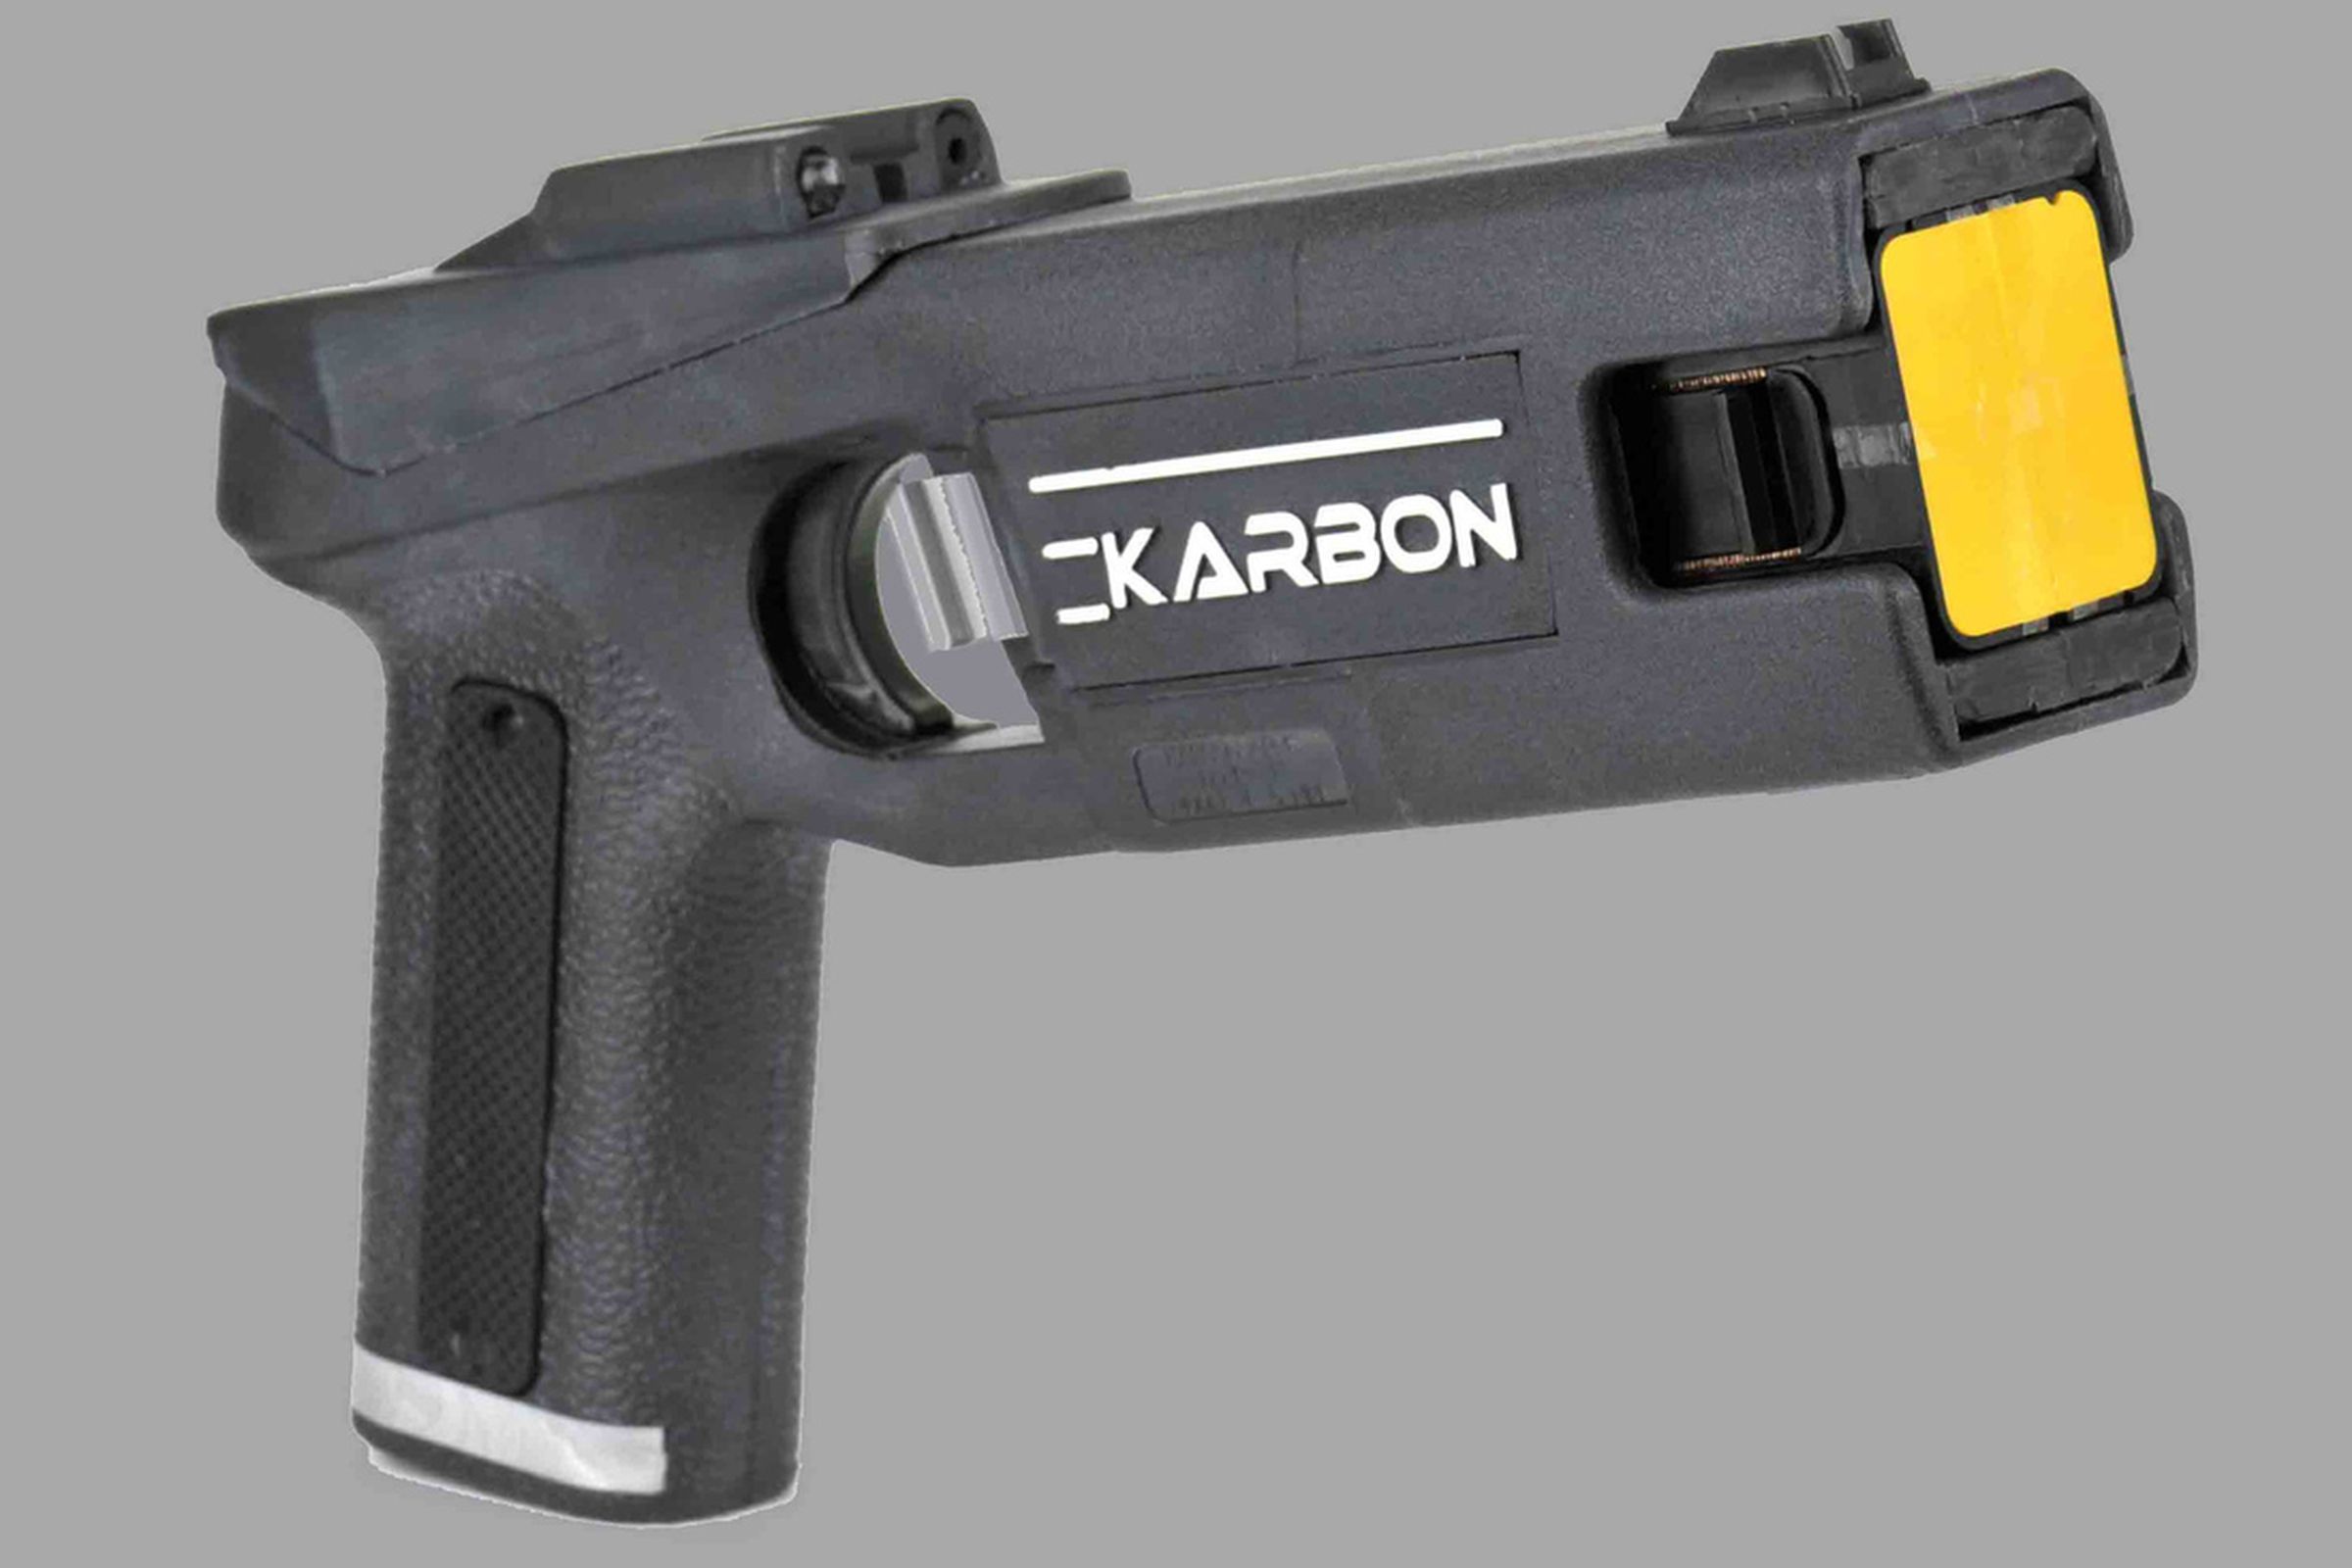 Karbon Arms' MPID electroshock gun was designed to compete with similar products by Taser International. Karbon went out of business this month after a long legal battle with Taser.